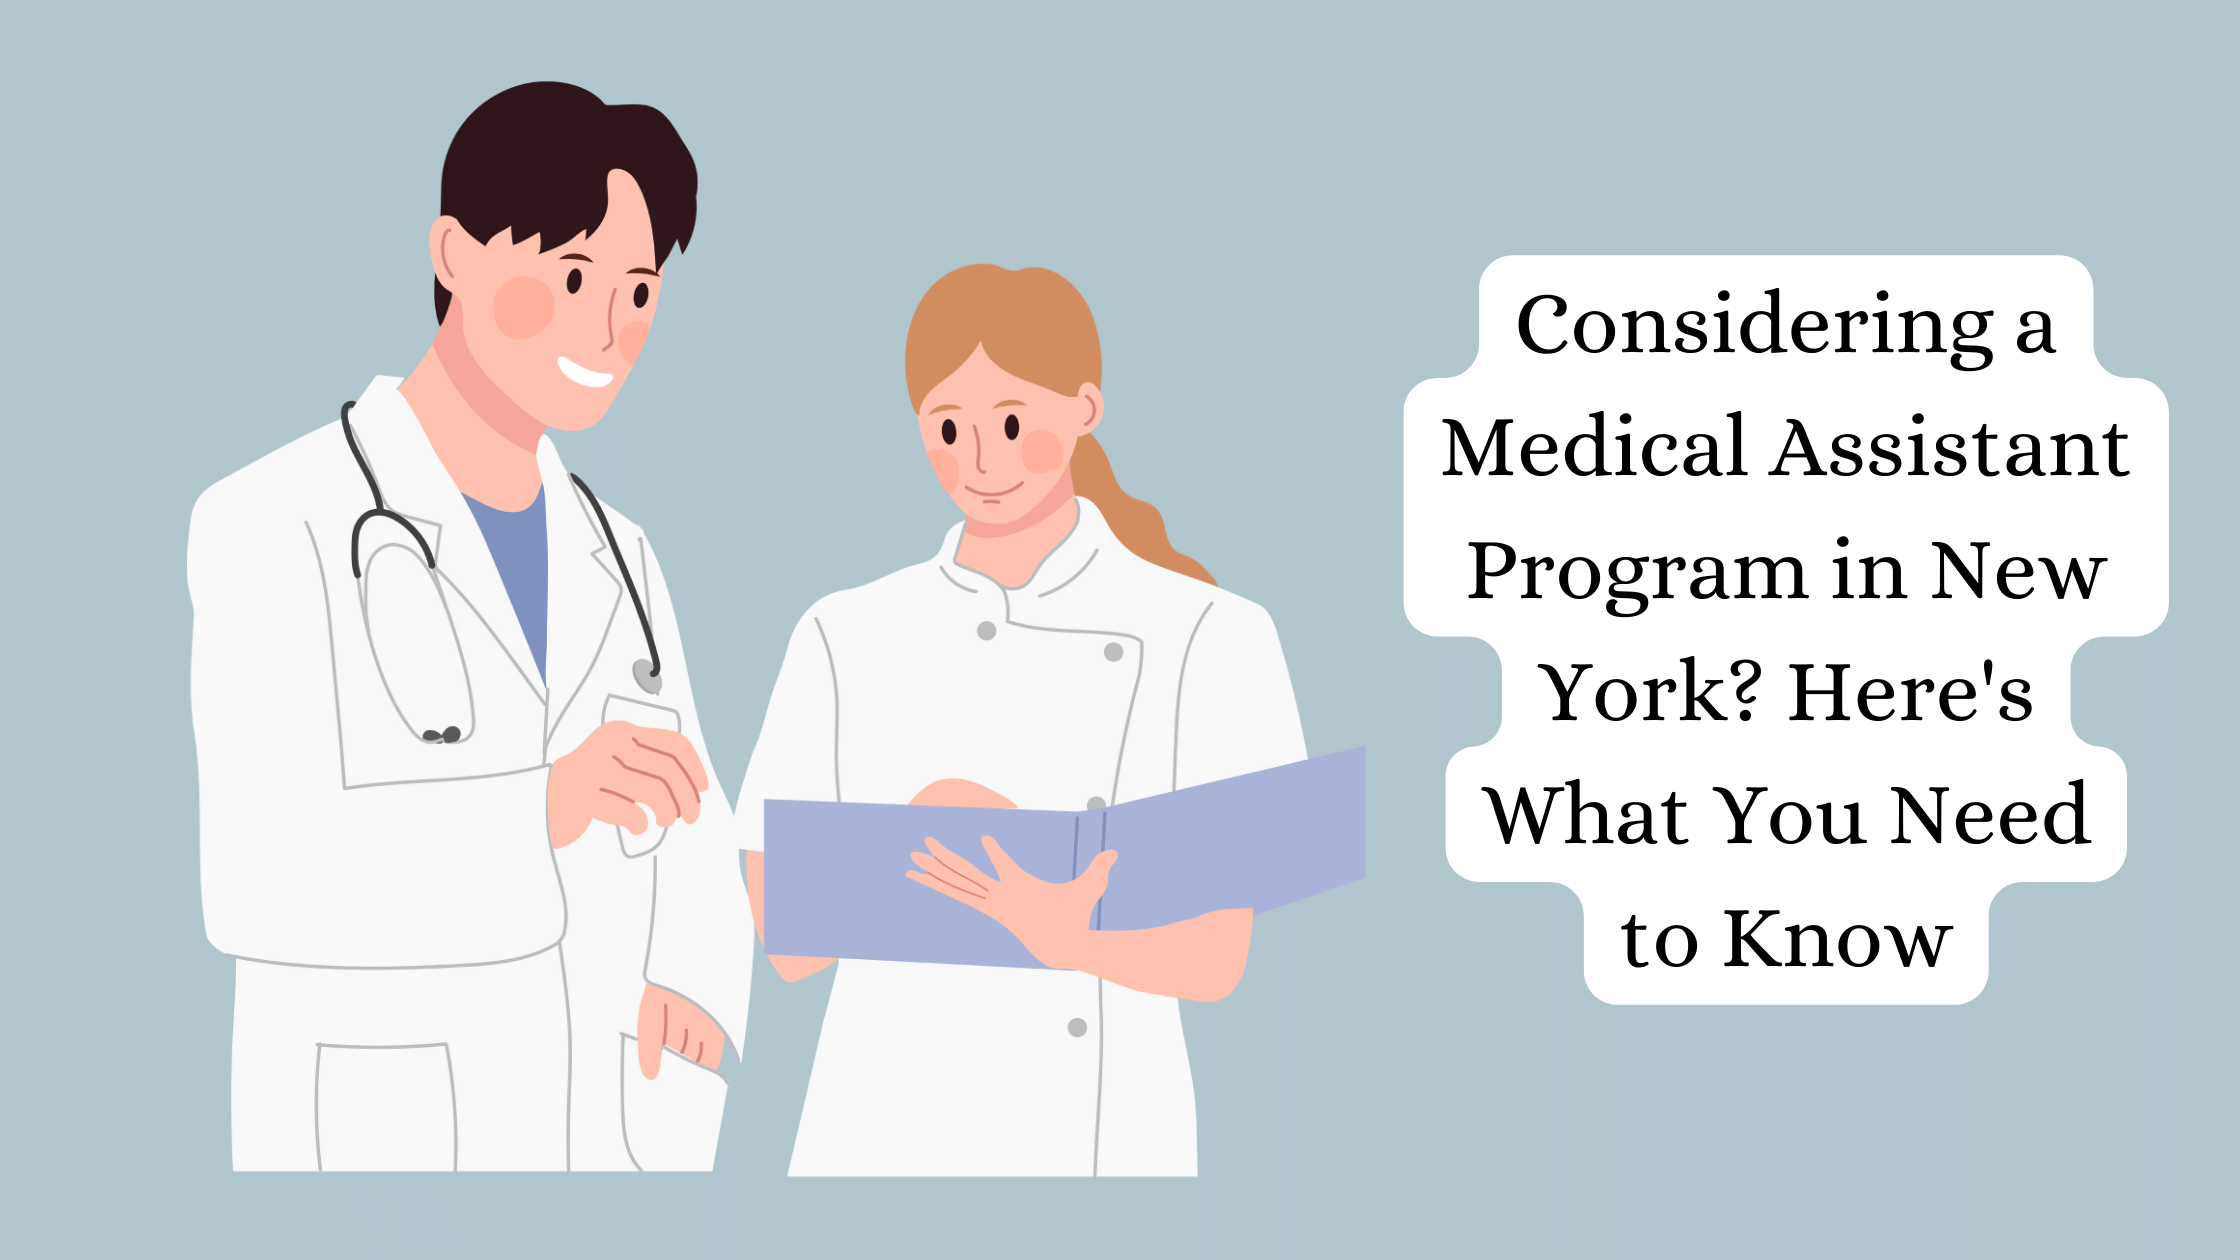 Considering a Medical Assistant Program in New York